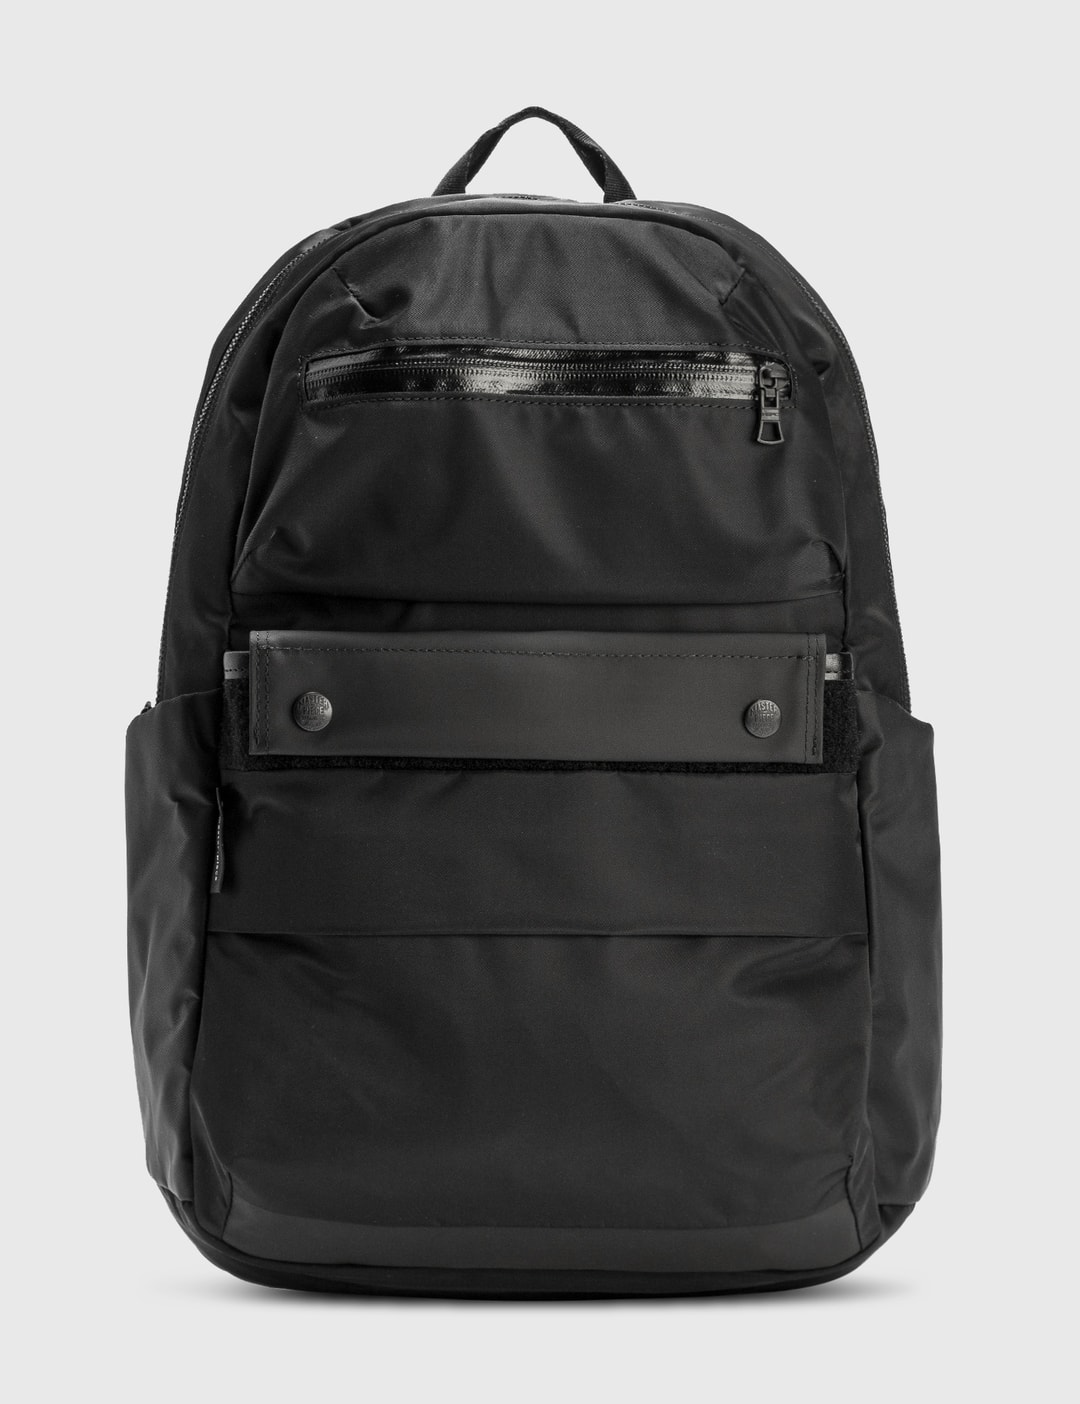 Master Piece - Age Backpack | HBX - Globally Curated Fashion and ...